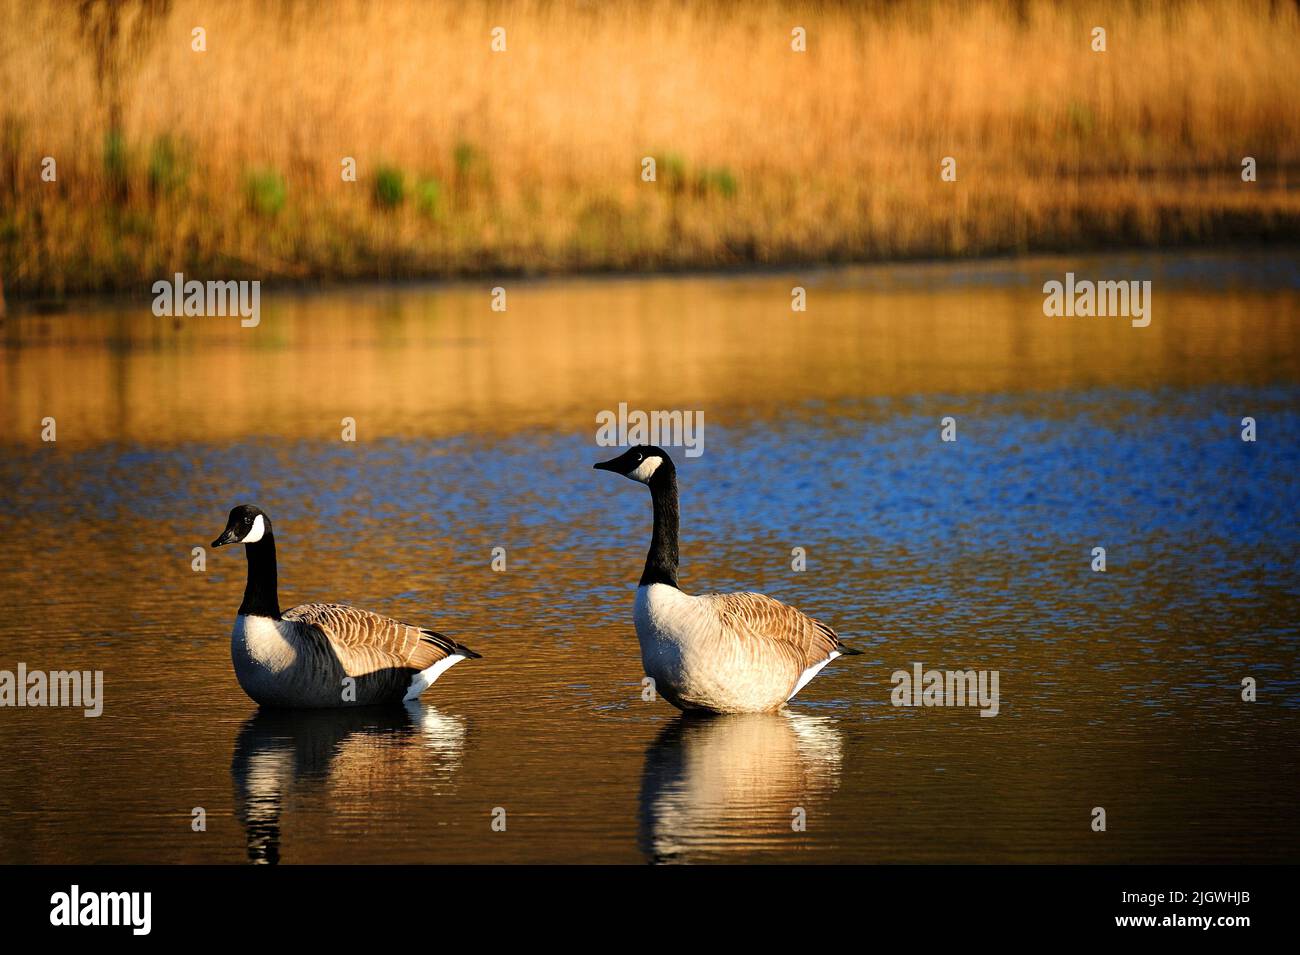 Two Canada geese (Branta canadensis) reflecting in the water Stock Photo